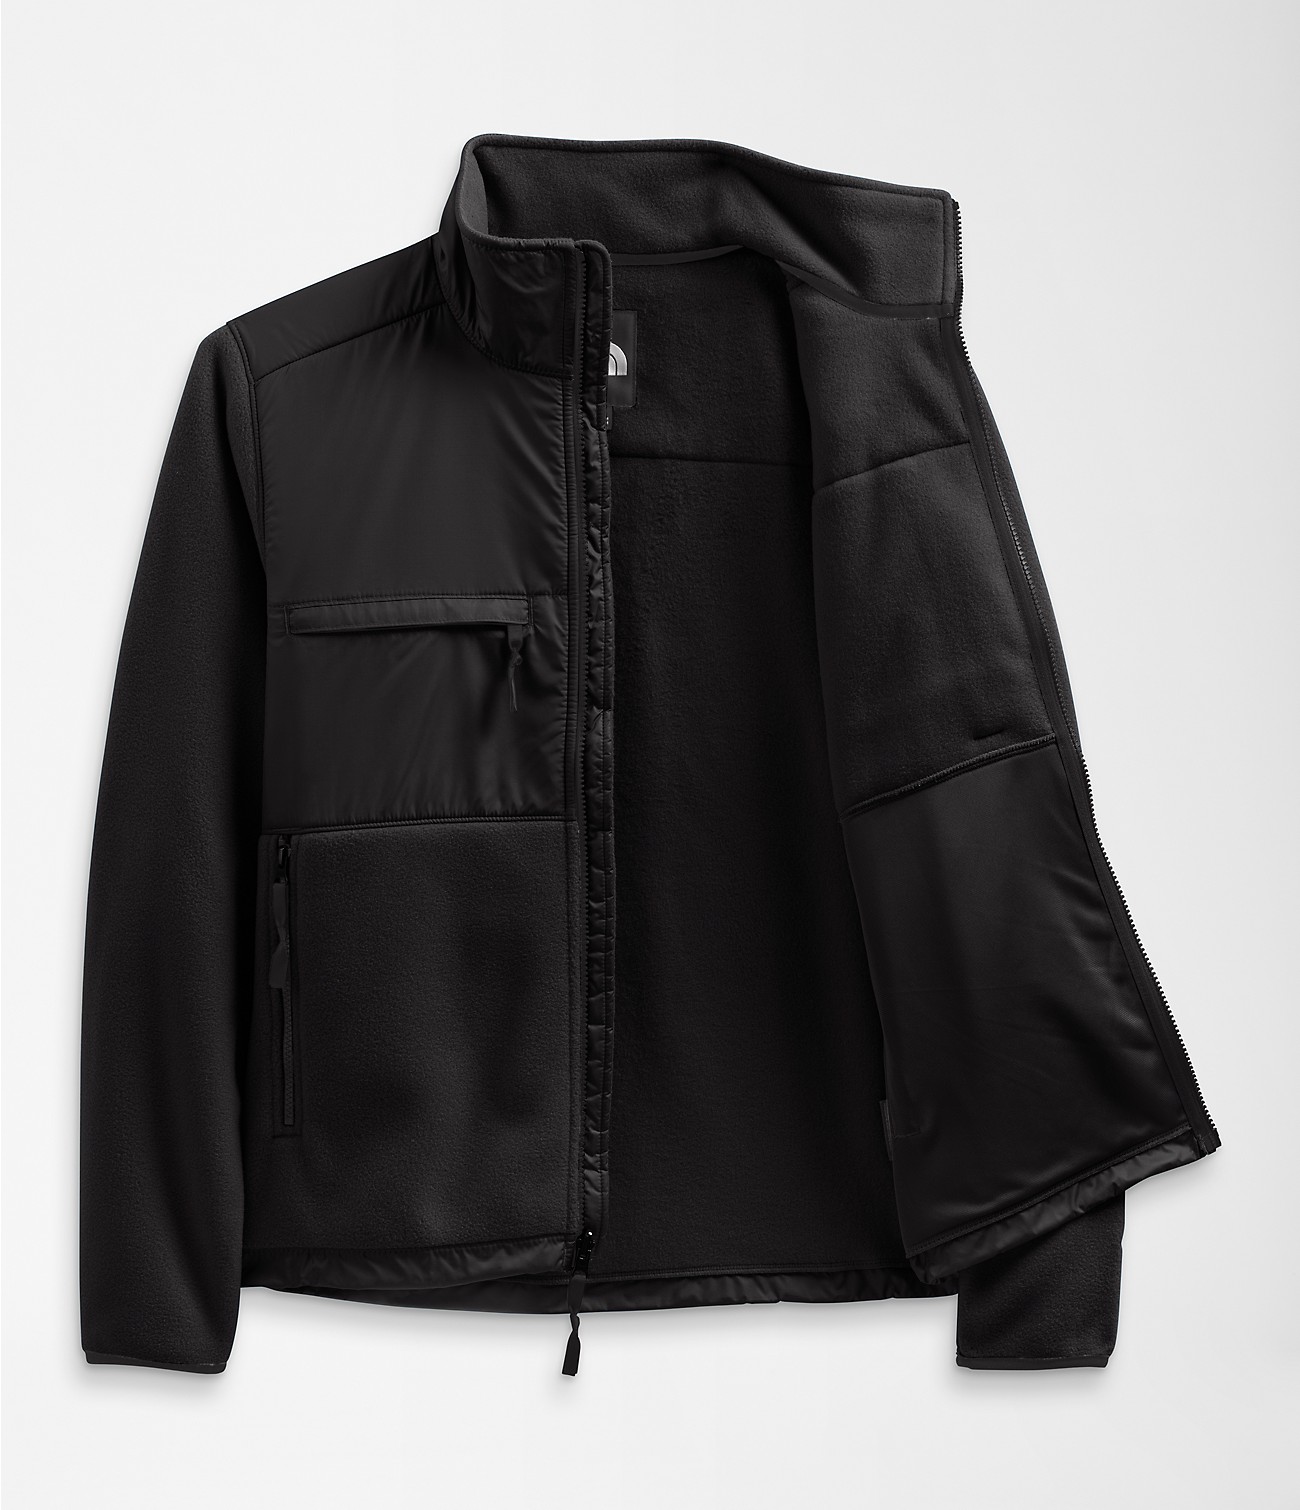 Unlock Wilderness' choice in the Patagonia Vs North Face comparison, the Denali Jacket by The North Face